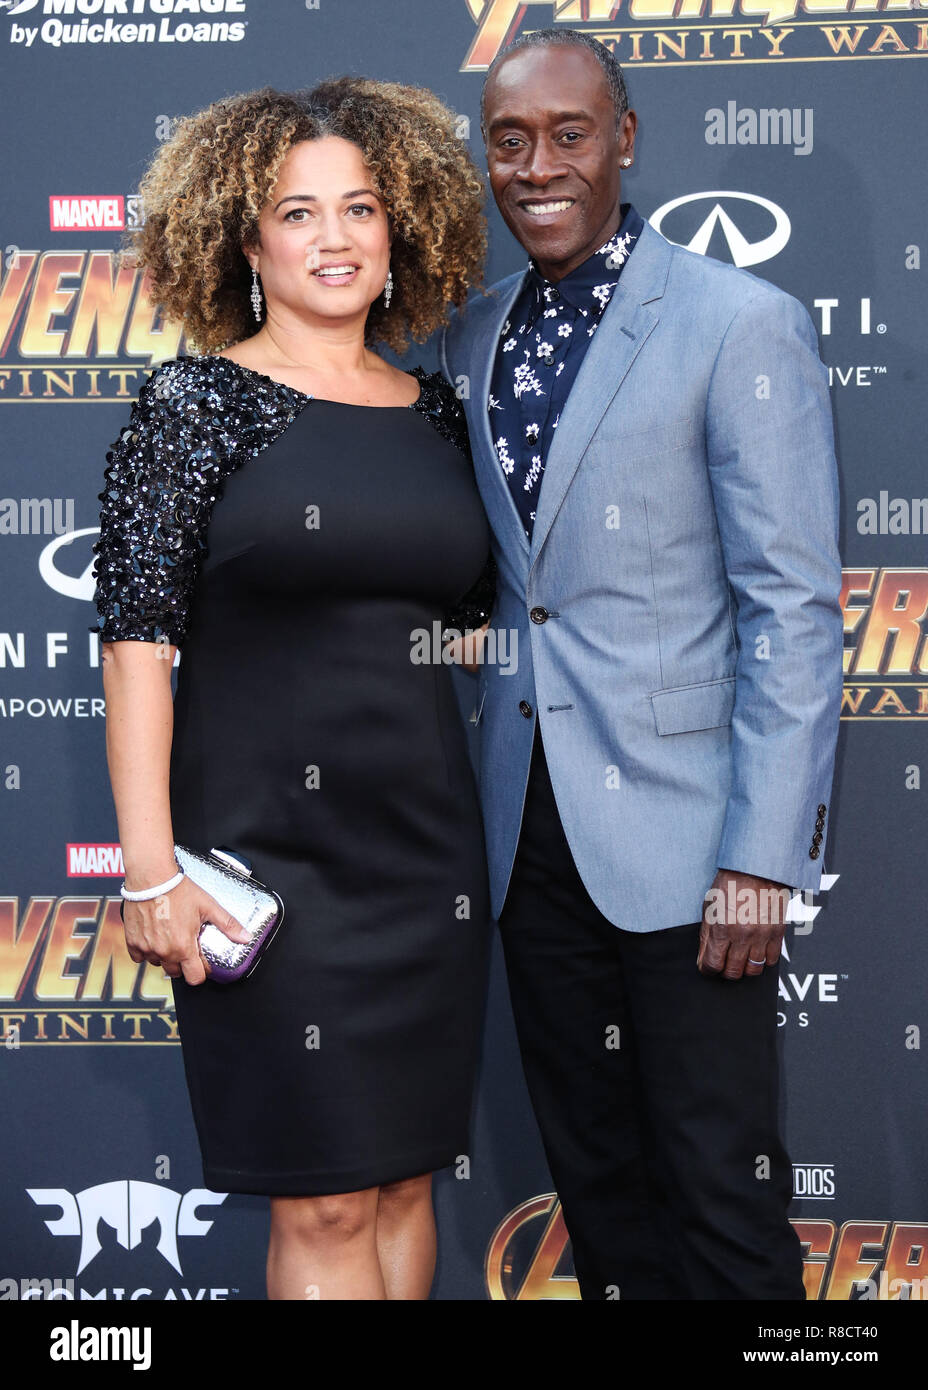 HOLLYWOOD, LOS ANGELES, CA, USA - APRIL 23: Don Cheadle at the World Premiere Of Disney And Marvel's 'Avengers: Infinity War' held at the El Capitan Theatre, Dolby Theatre and TCL Chinese Theatre IMAX on April 23, 2018 in Hollywood, Los Angeles, California, United States. (Photo by Xavier Collin/Image Press Agency) Stock Photo